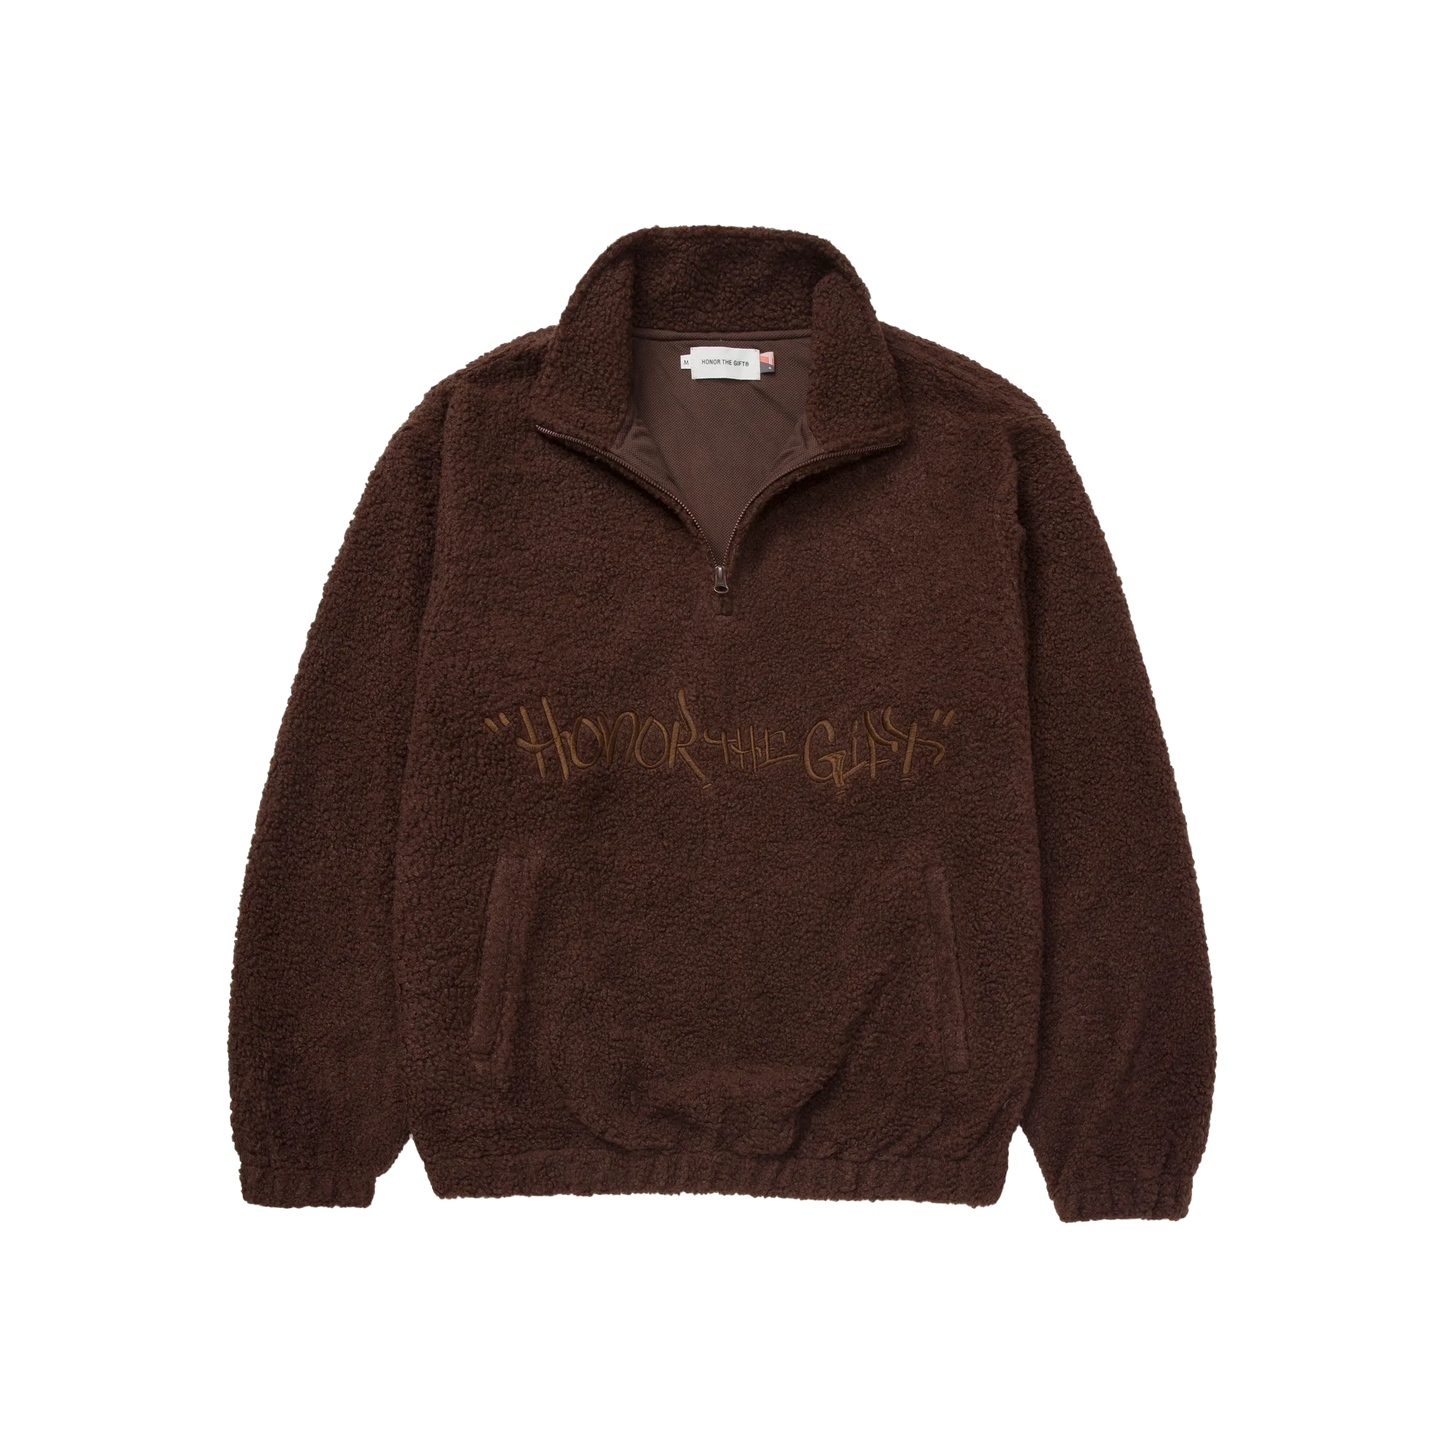 Honor The Gift C-Fall Script Sherpa Pullover - Brown